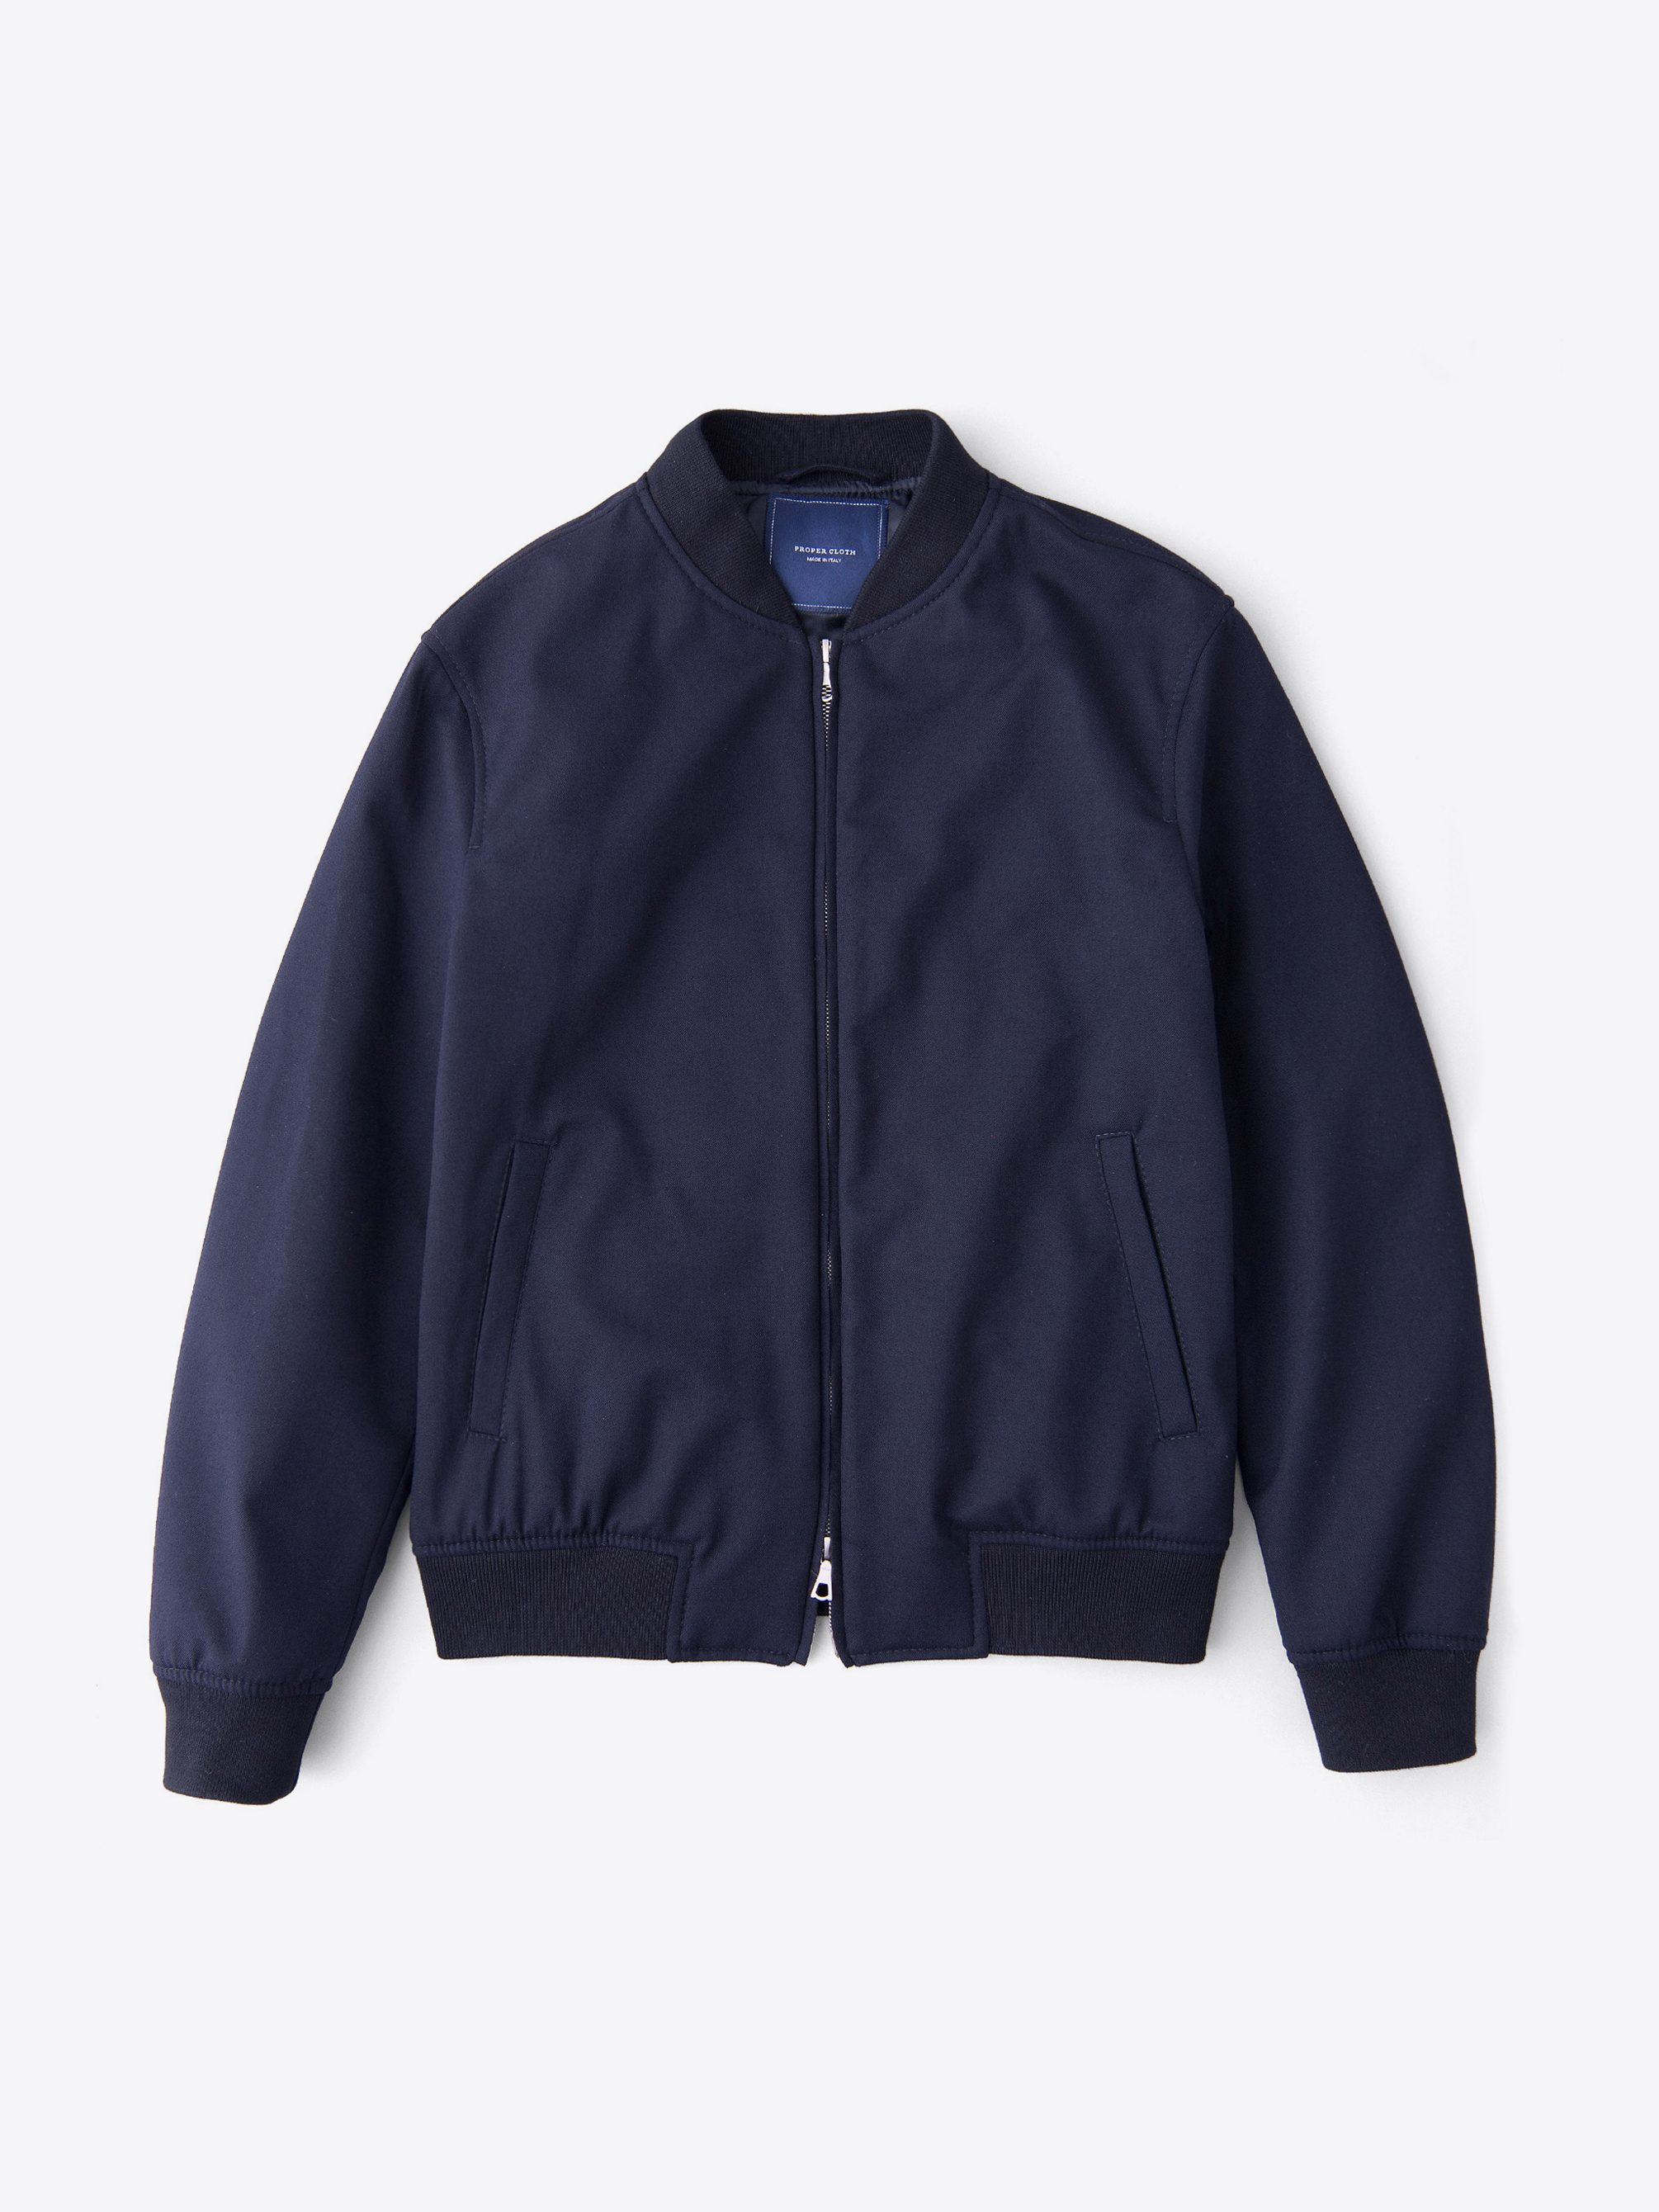 Zoom Image of Navy Wool Storm System Bomber